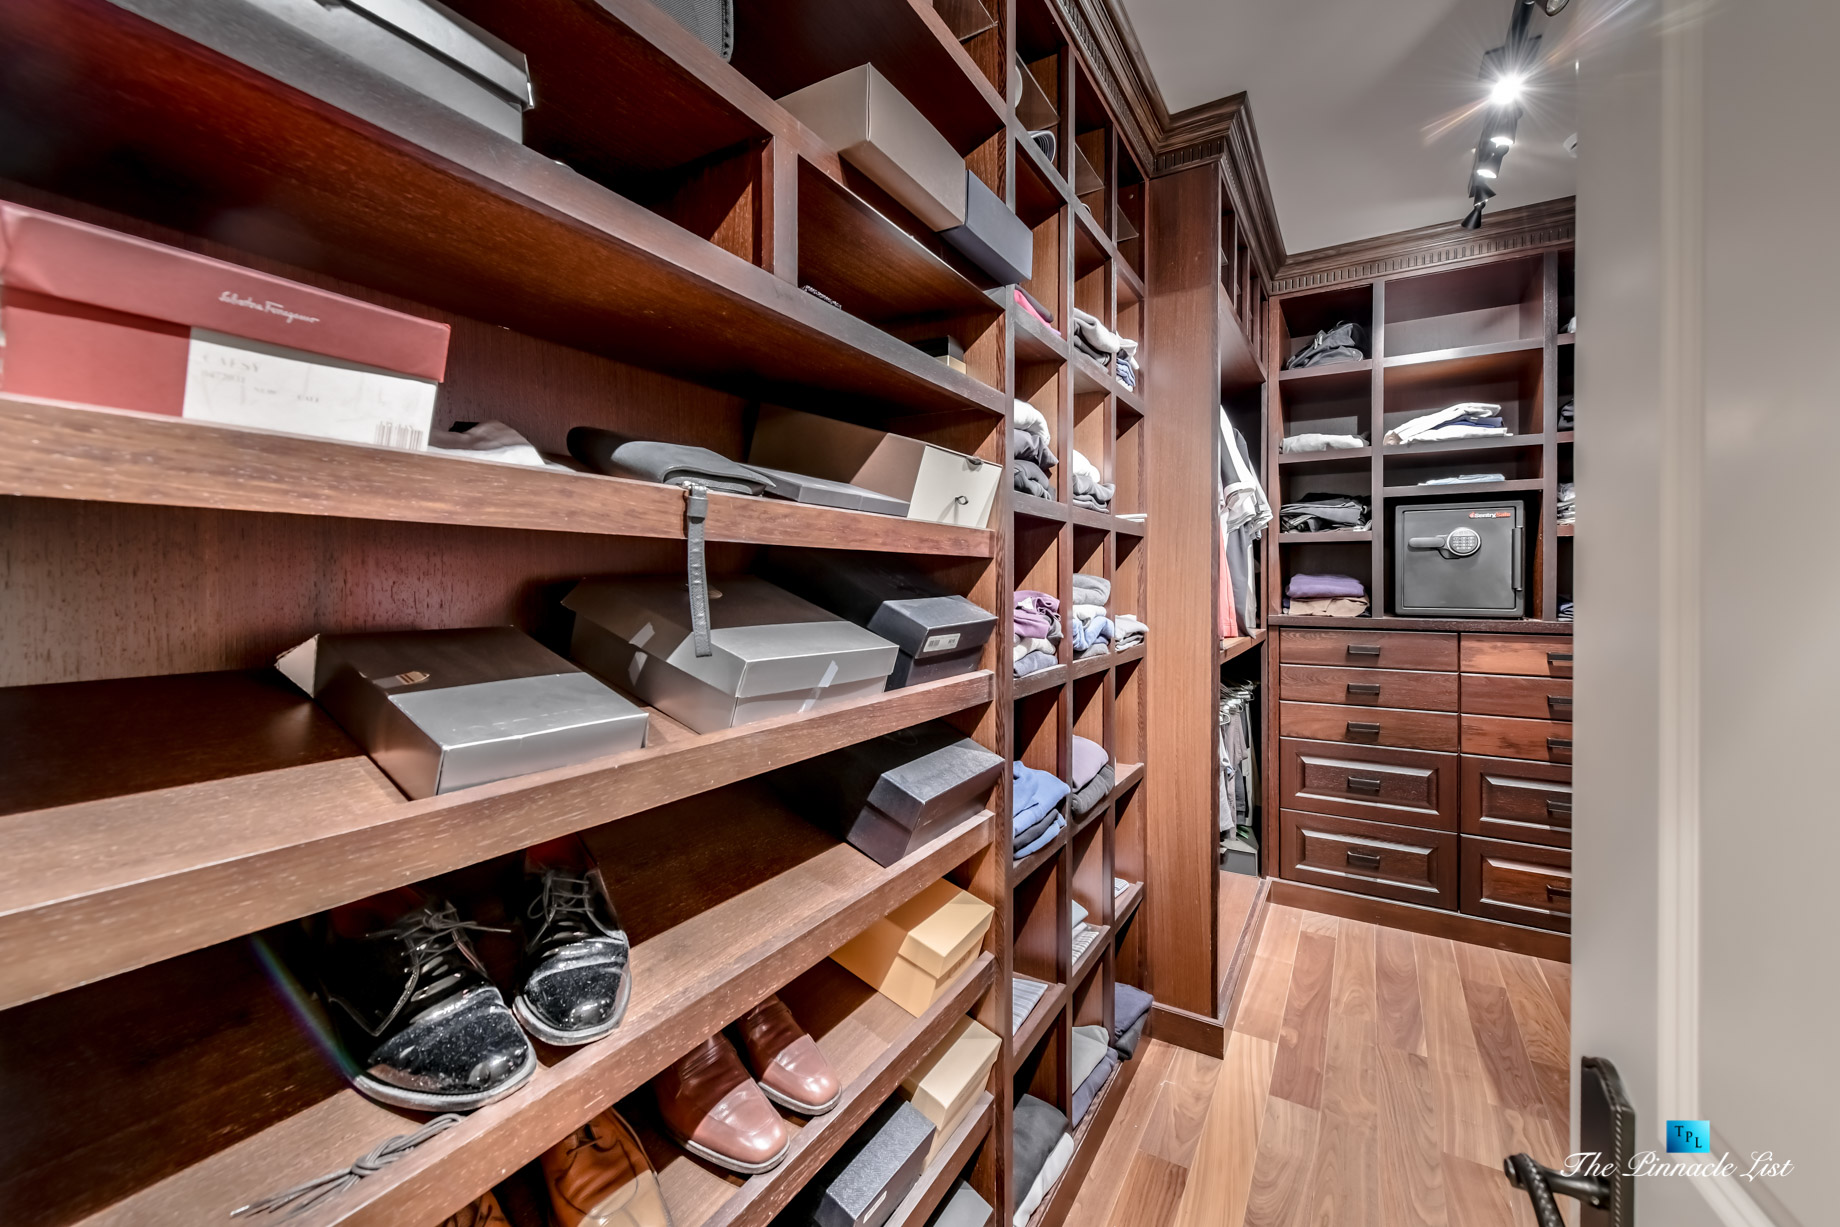 3053 Anmore Creek Way, Anmore, BC, Canada - Master Walk In Closet for Him - Luxury Real Estate - Greater Vancouver Home